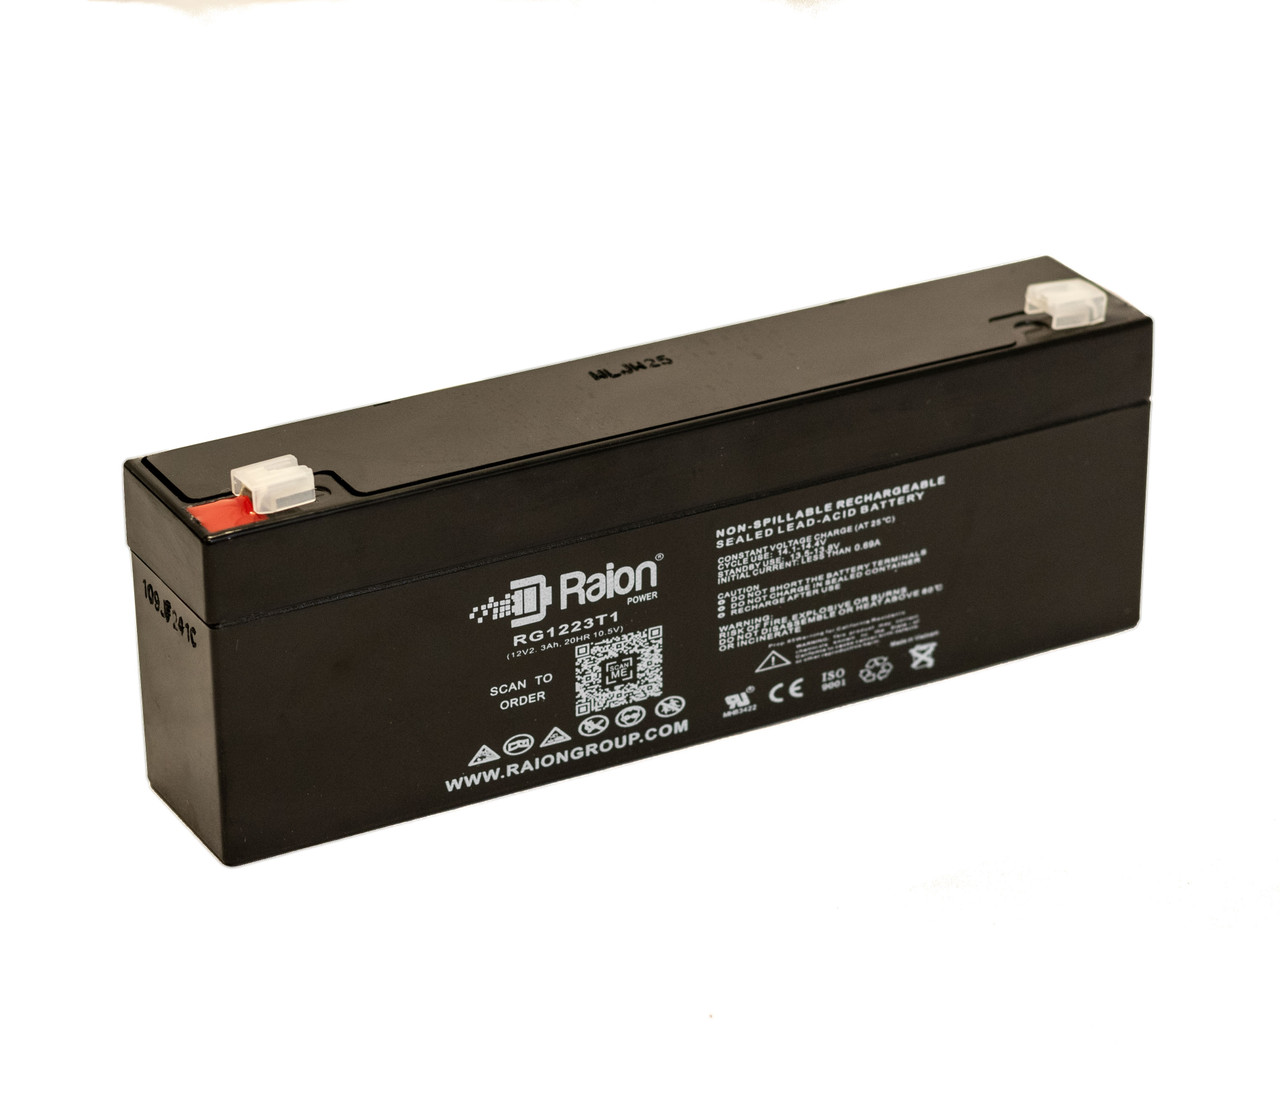 Raion Power RG1223T1 Replacement Battery for Esaote Biomedical ECG P8000 Power